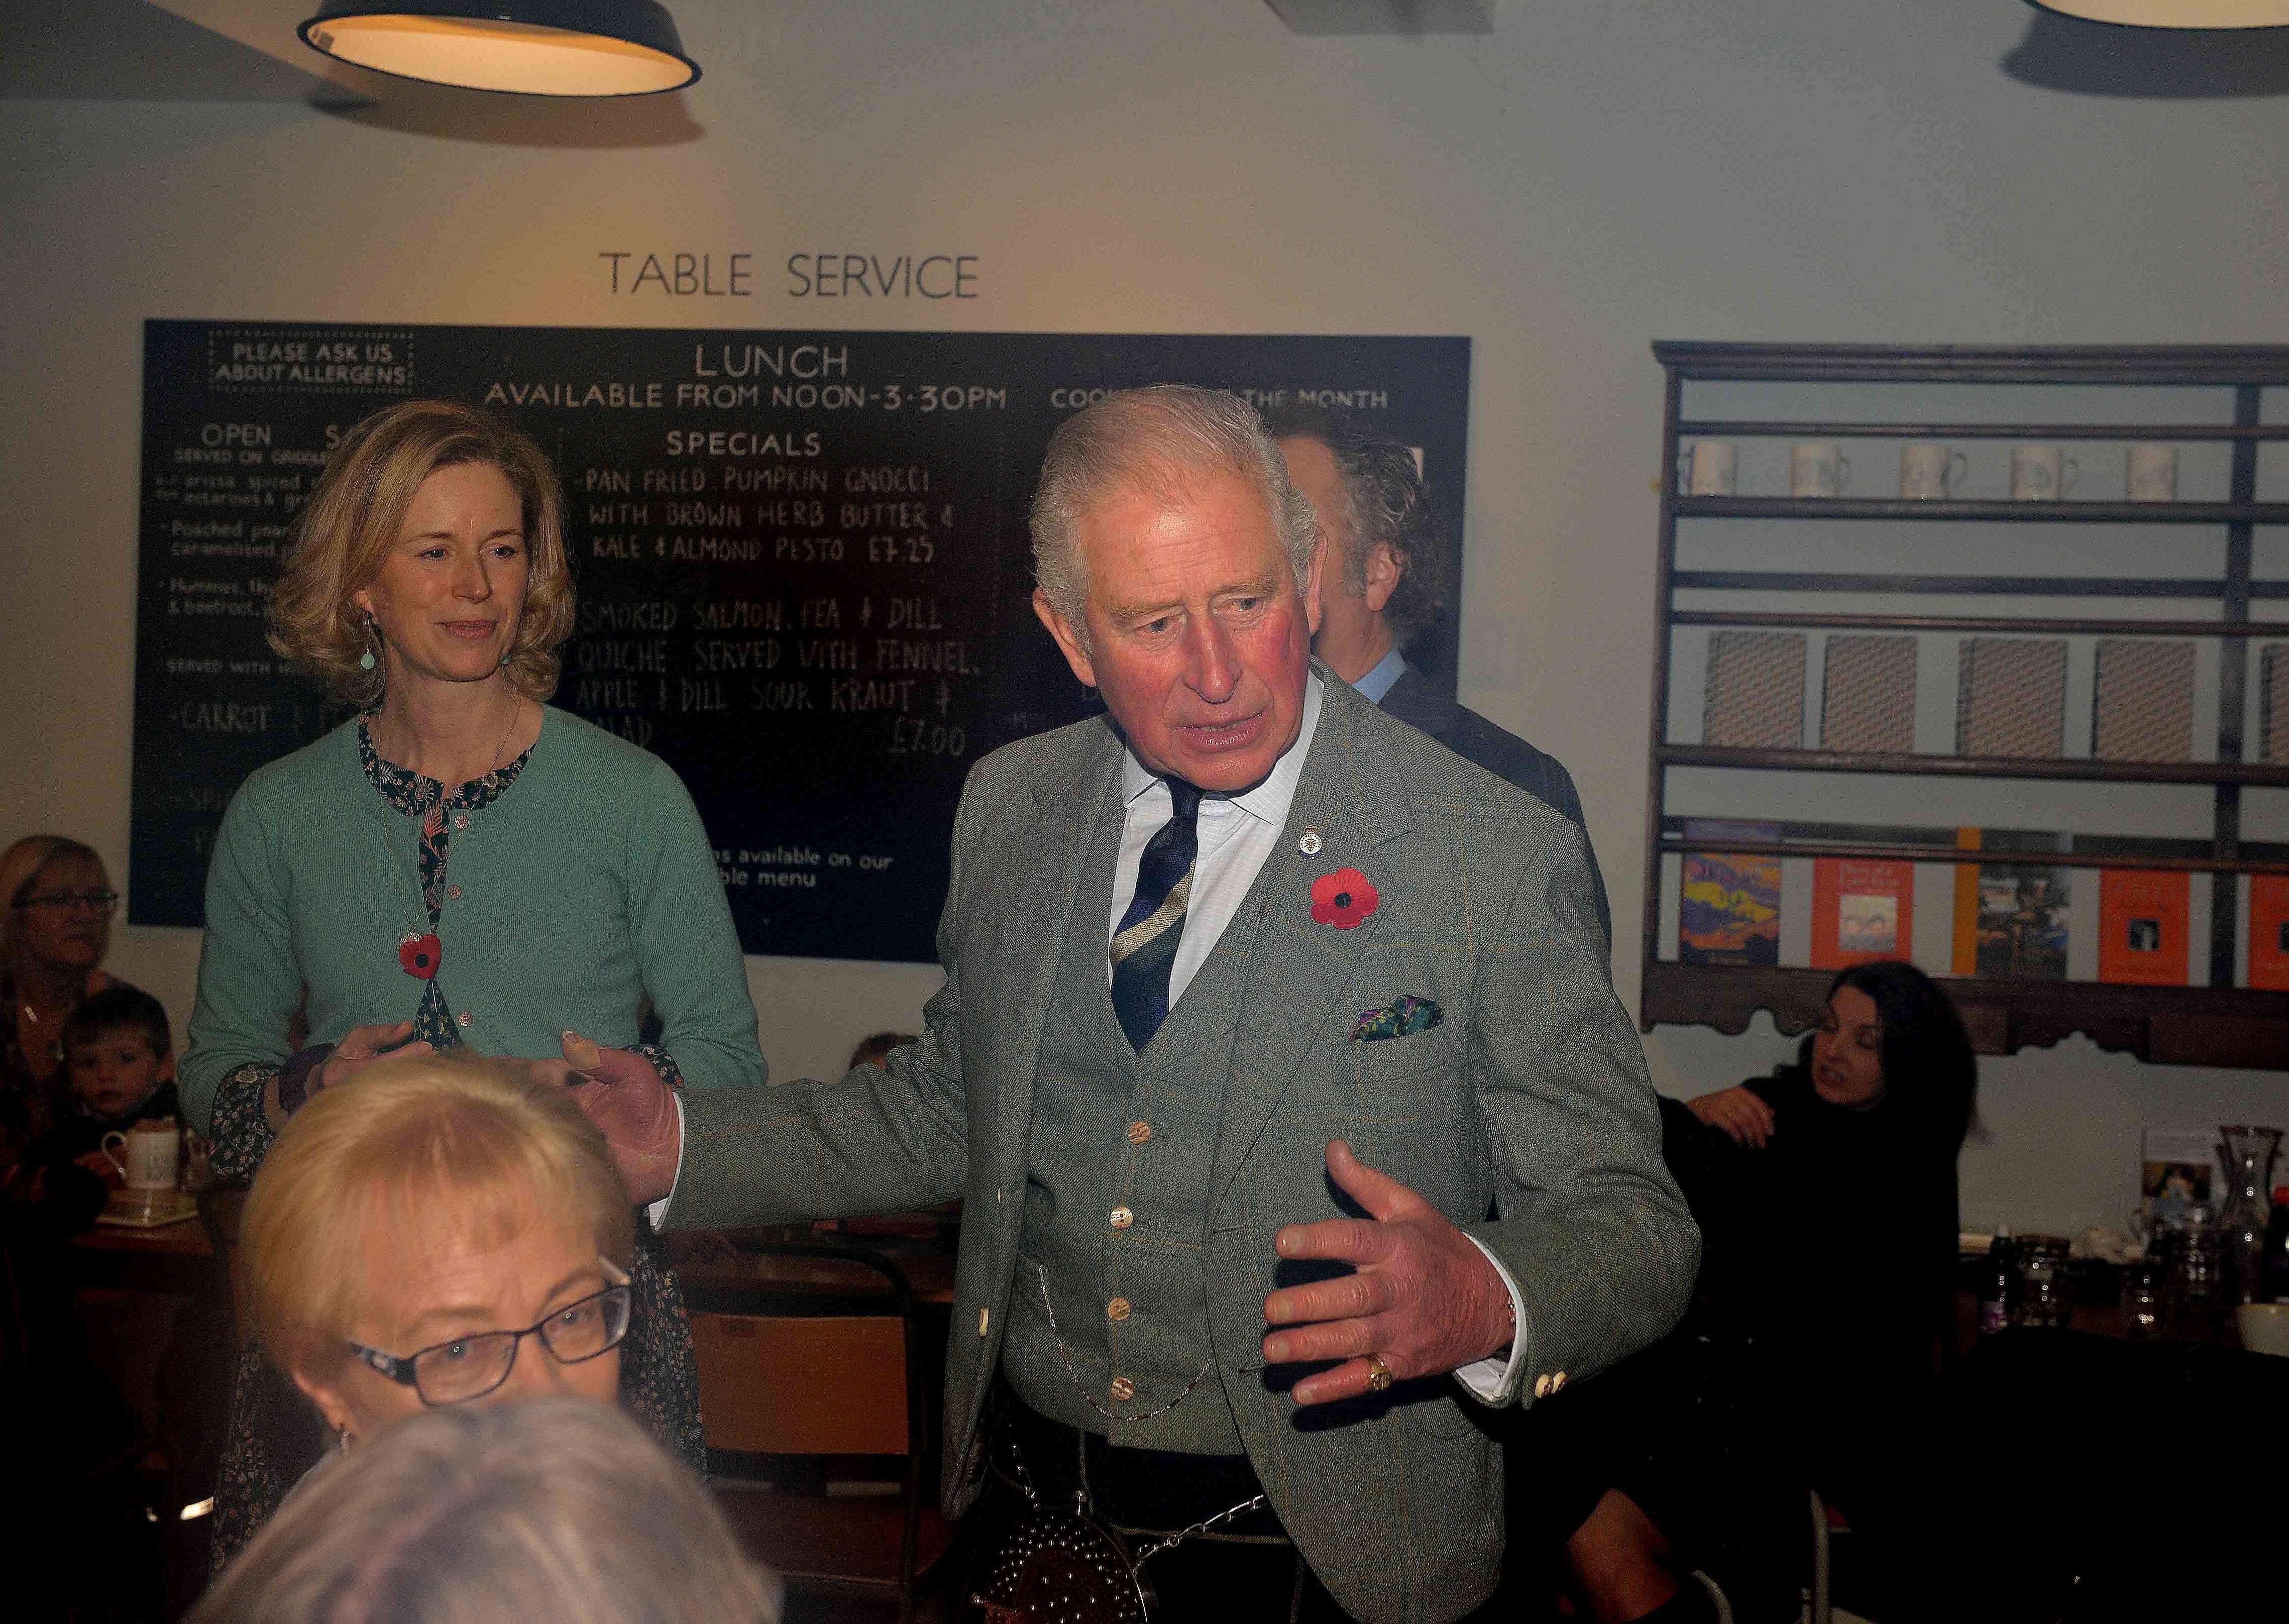 Duke of Rothesay speaks with diners in the cafe.